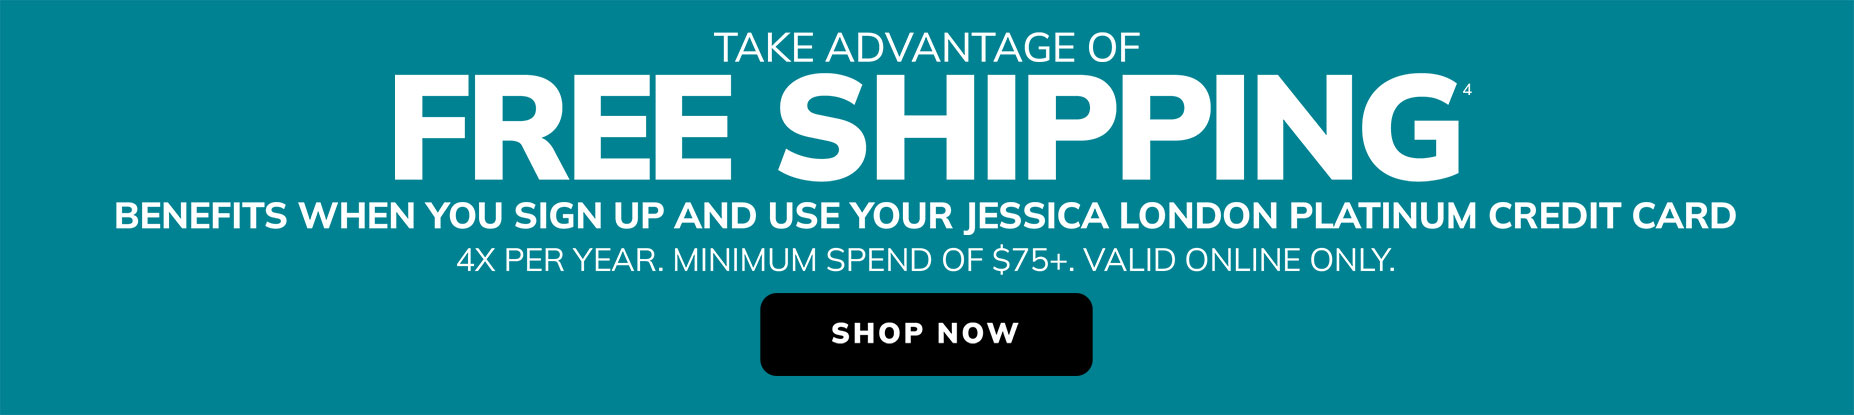 Take advantage of Free shipping benefits with Jessica London Platinum credit card